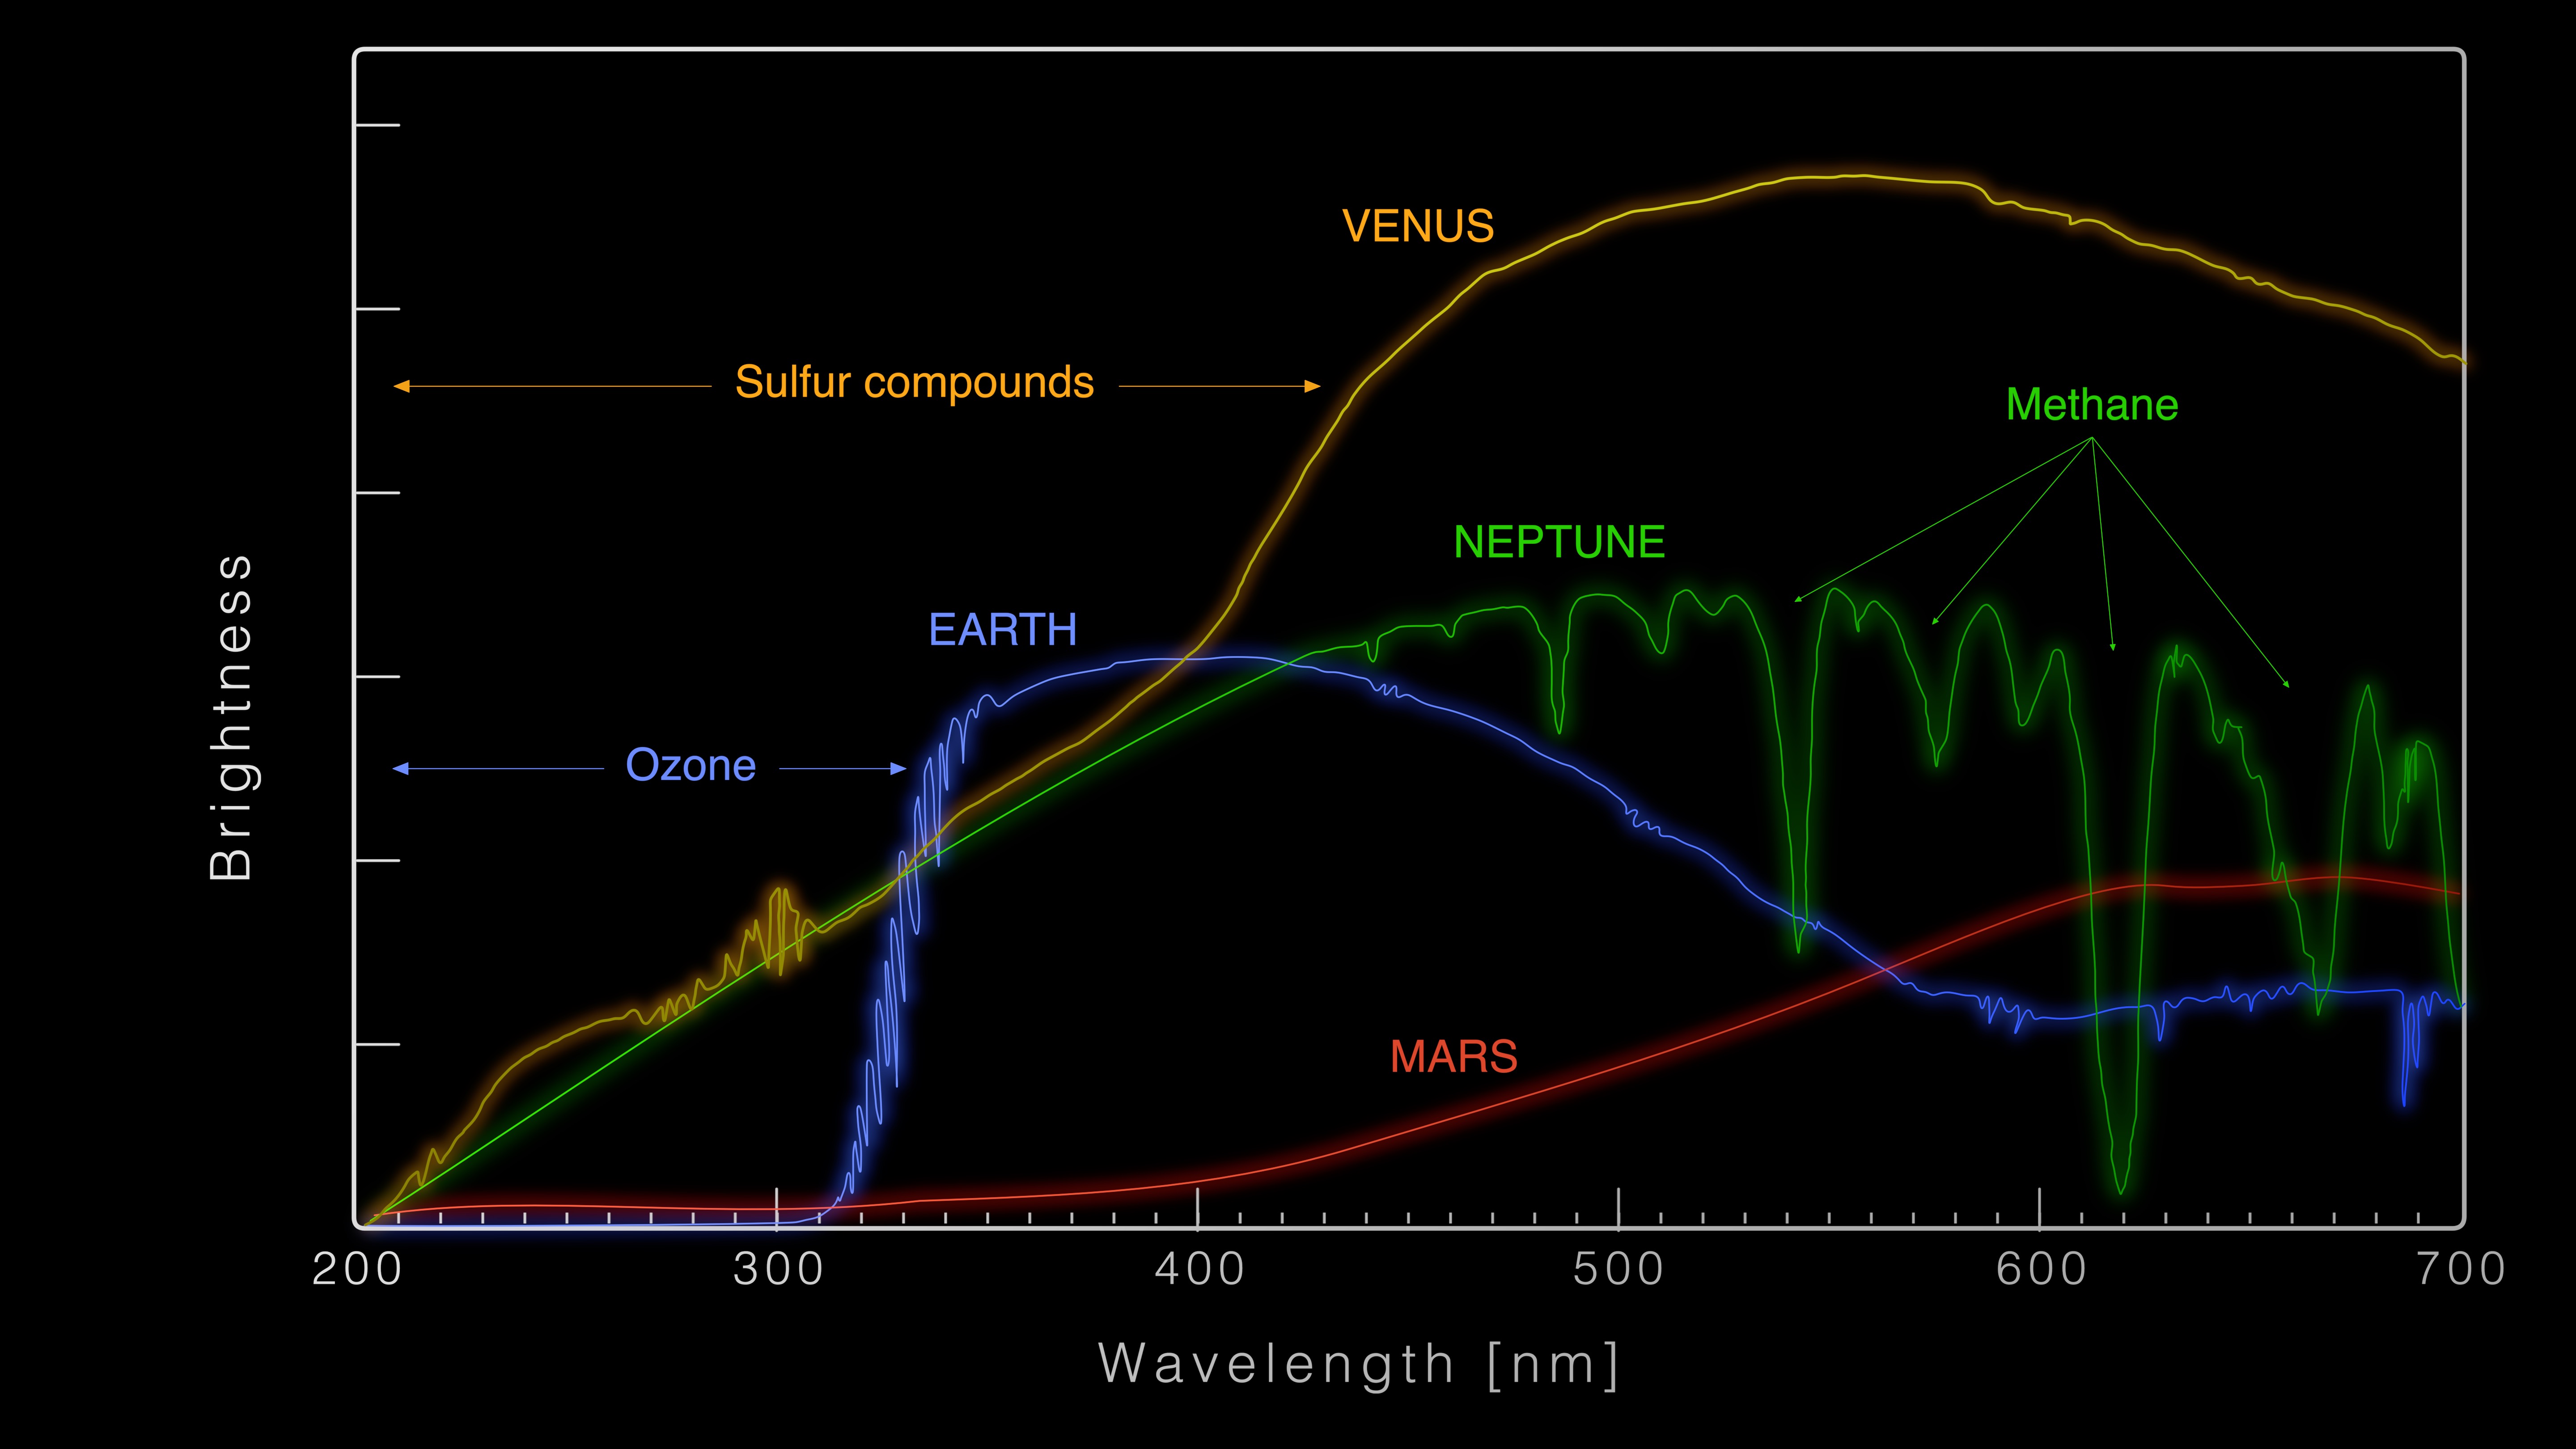 Illustration showing the spectra of several planets in our solar system, whose individual characteristics shape the light we detect.Credit: NASA's Goddard Space Flight Center